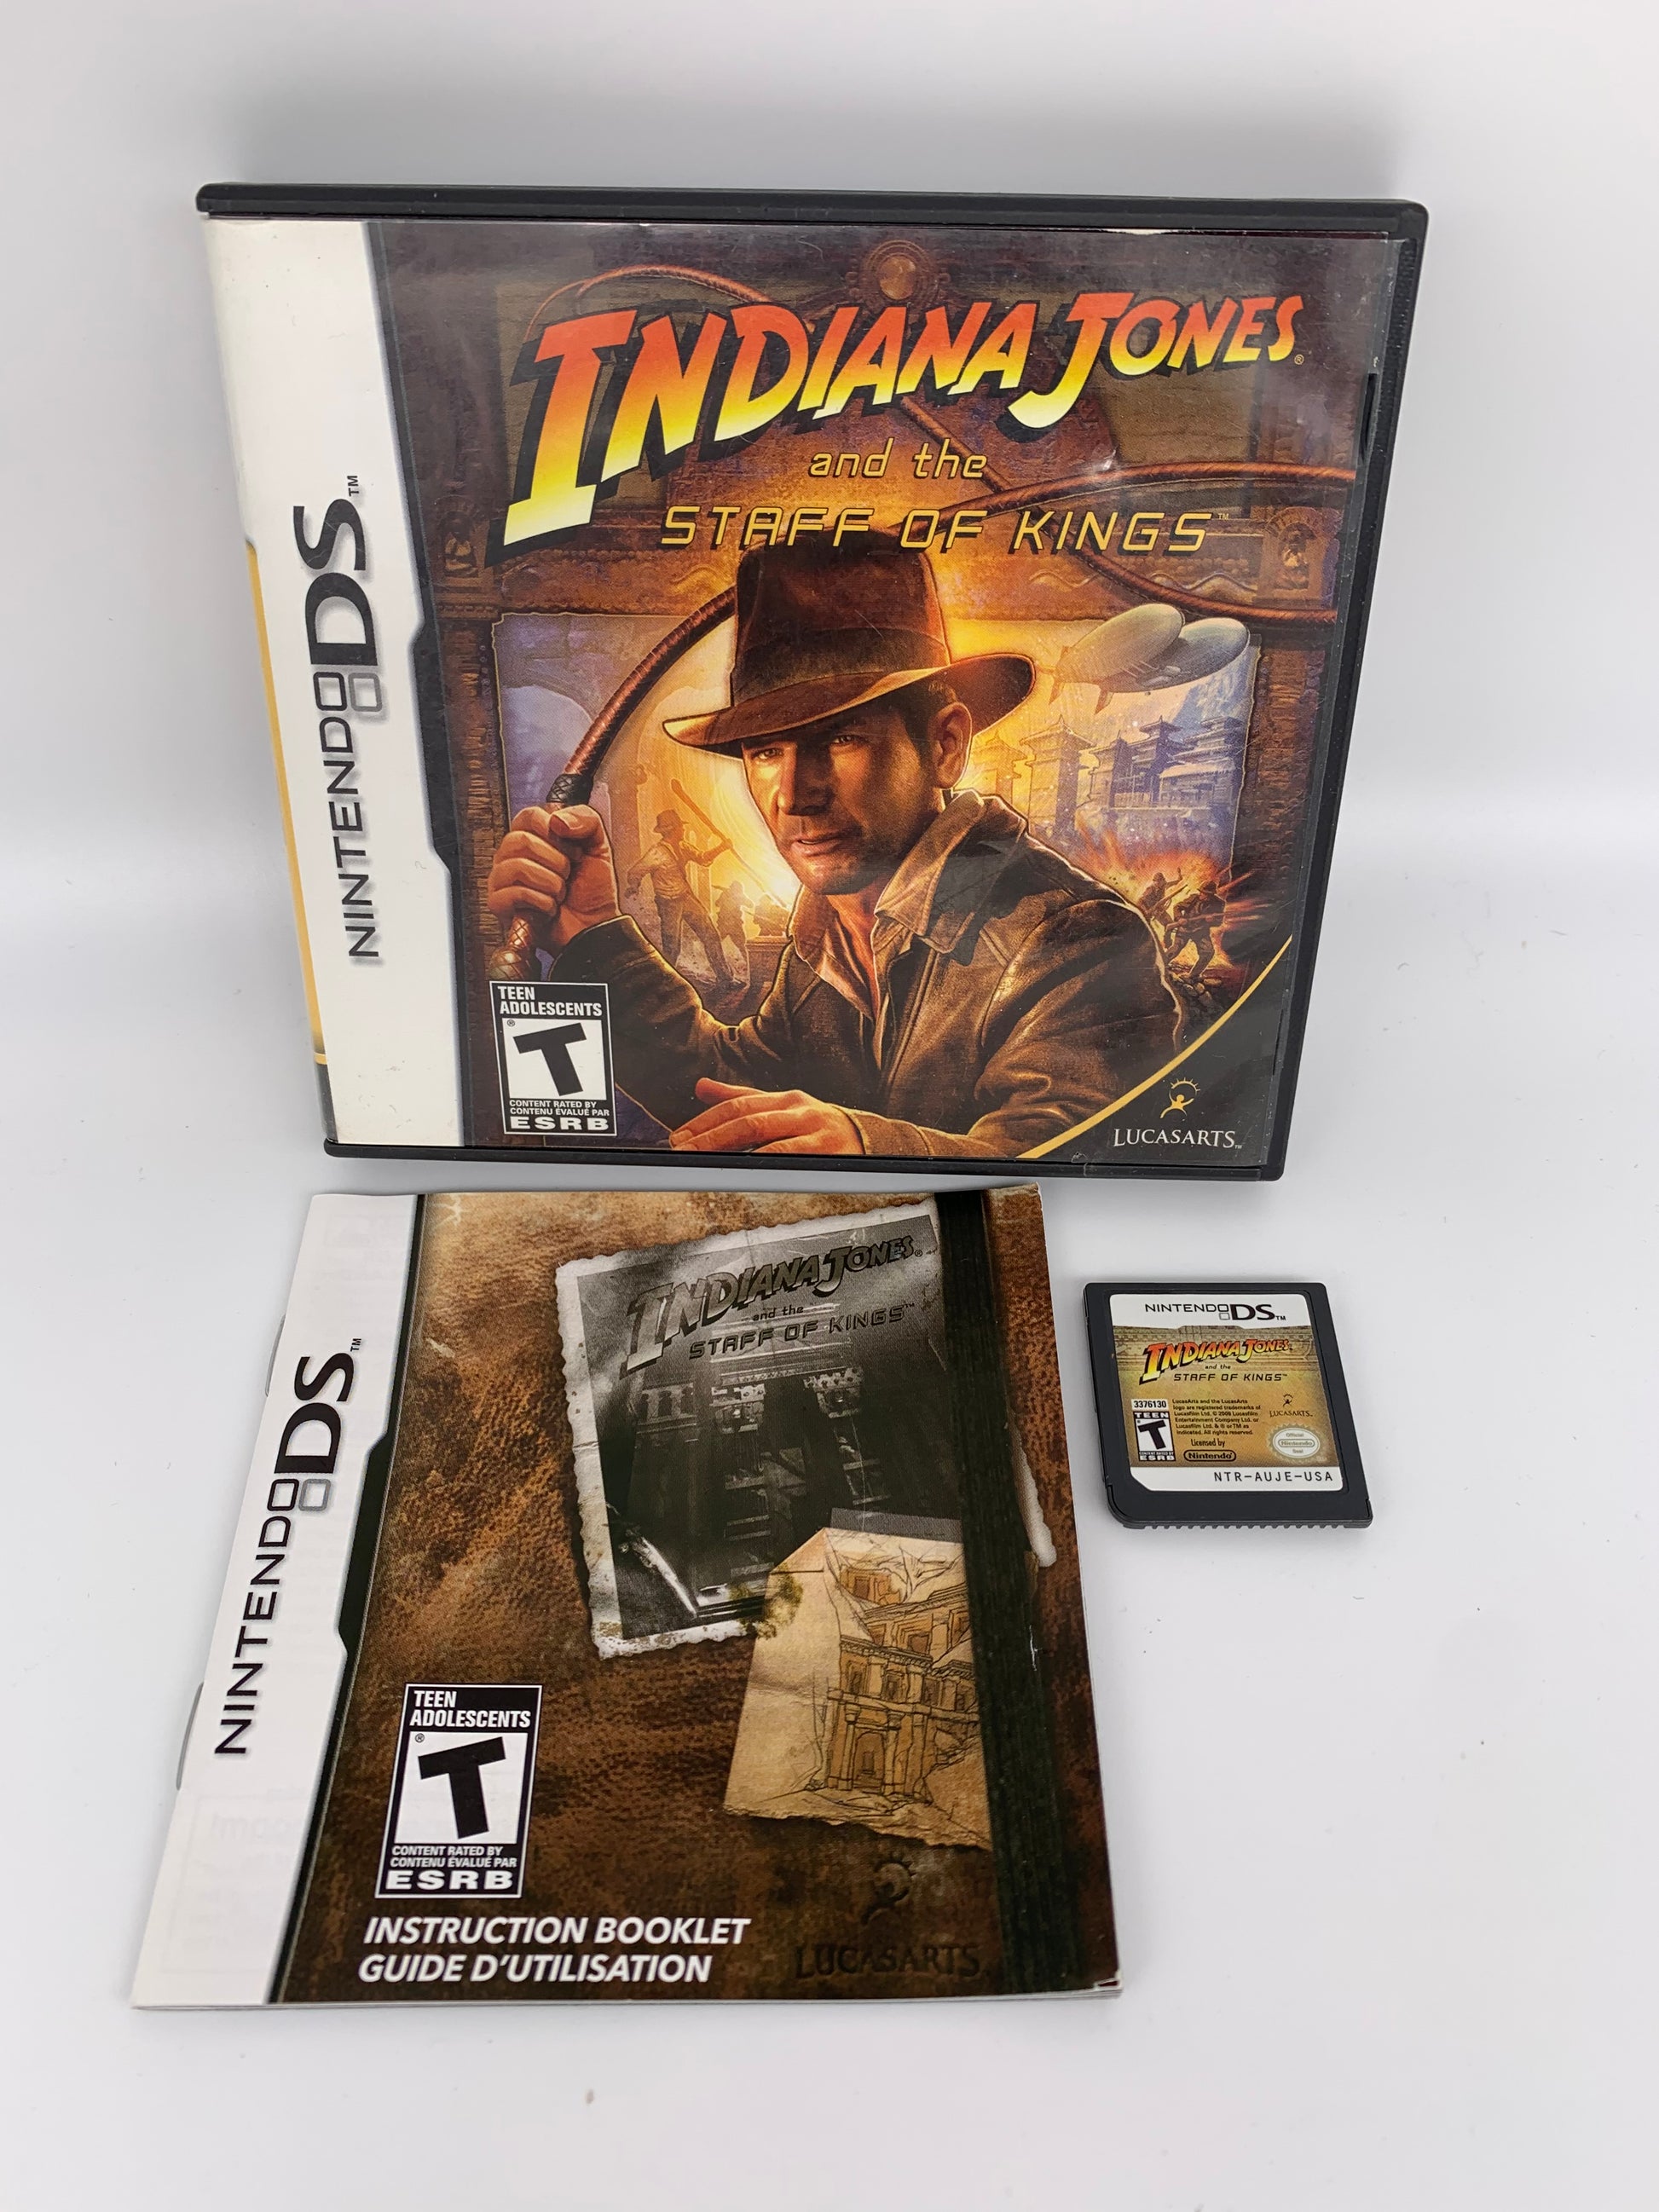 PiXEL-RETRO.COM : NINTENDO DS (DS) COMPLETE CIB BOX MANUAL GAME NTSC INDIANA JONES AND THE STAFF OF KINGS